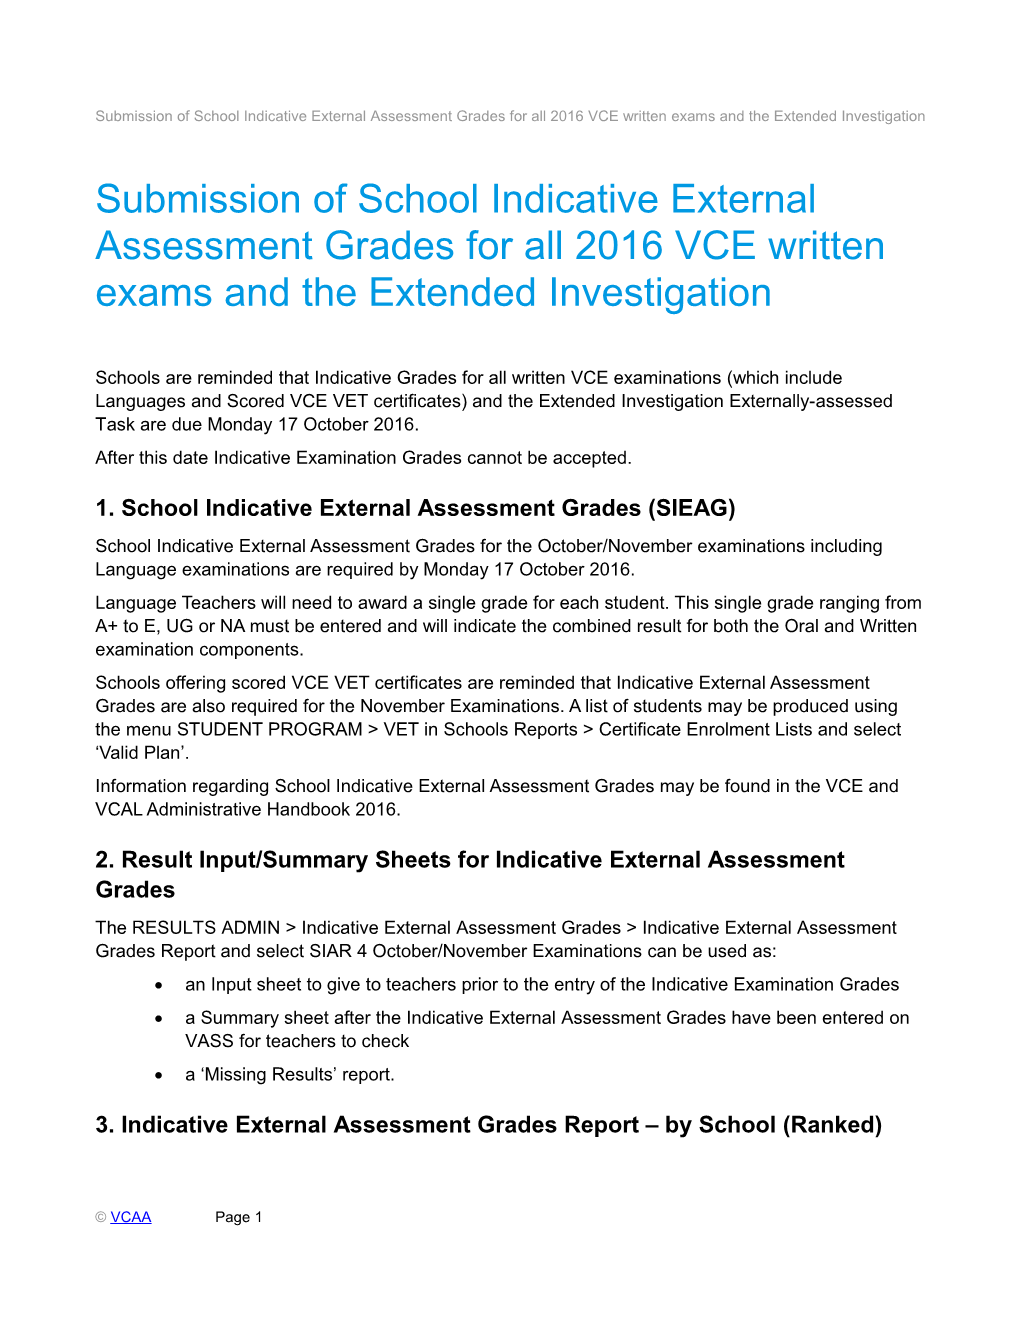 Submission of School Indicative External Assessment Grades for All 2016 VCE Written Exams